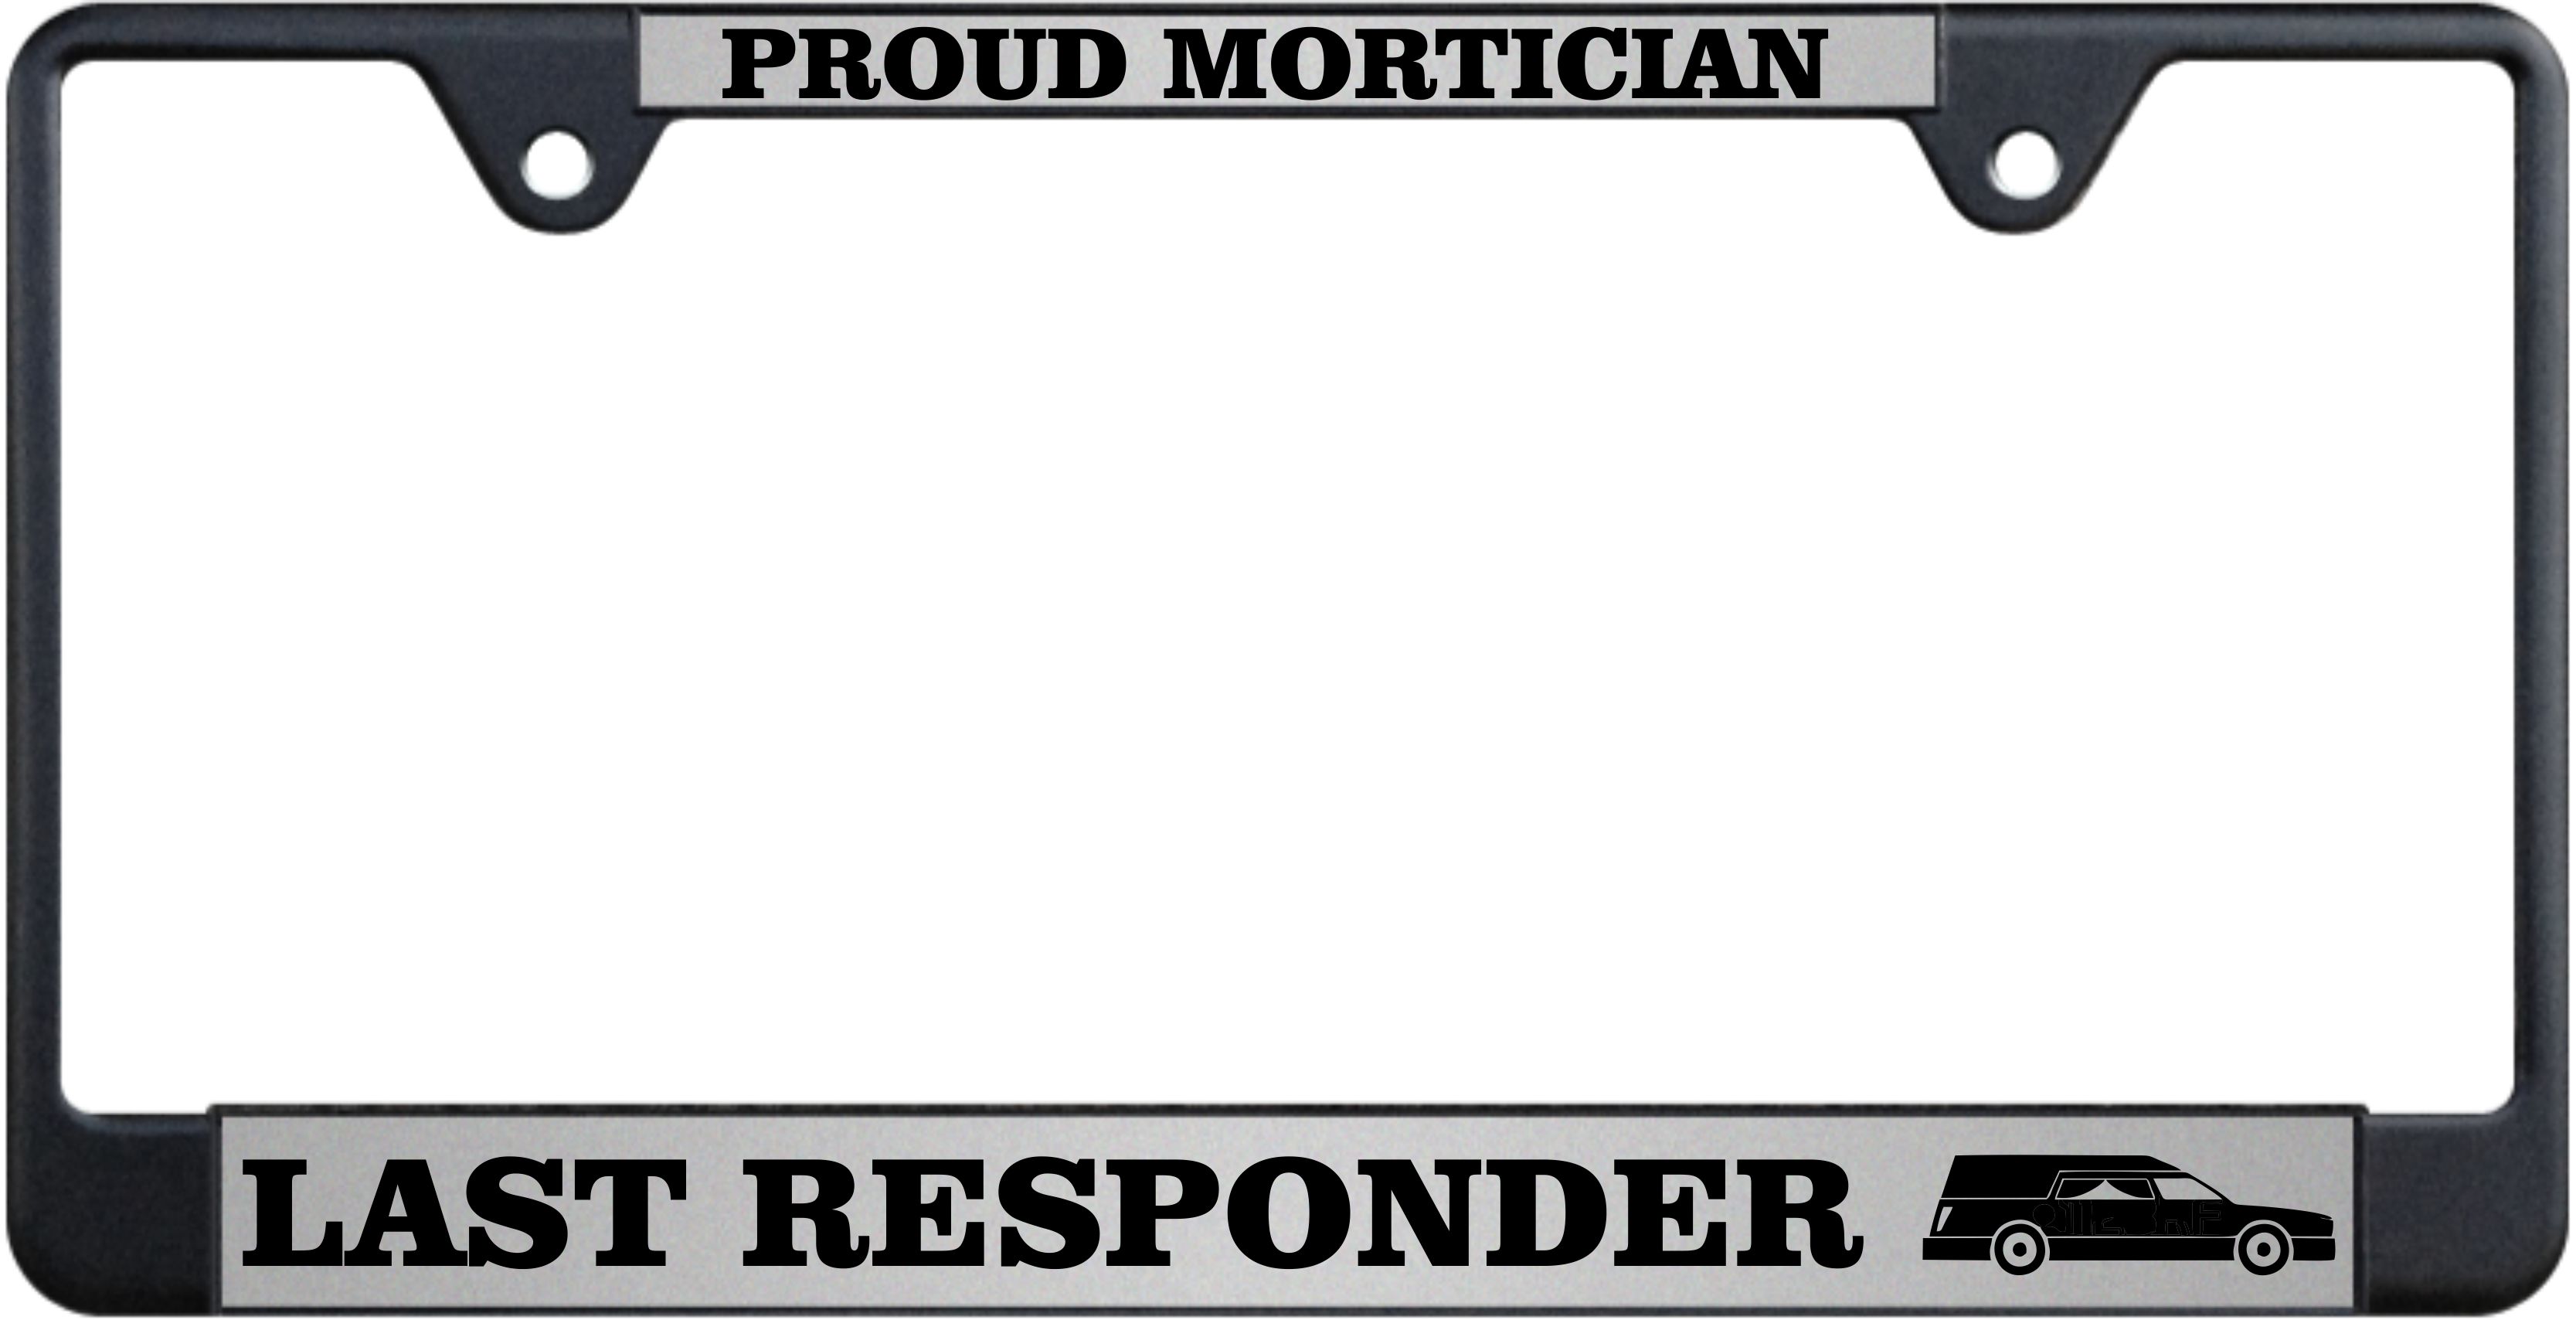 PROUD MORTICIAN - Personalized Car License Plate Frame